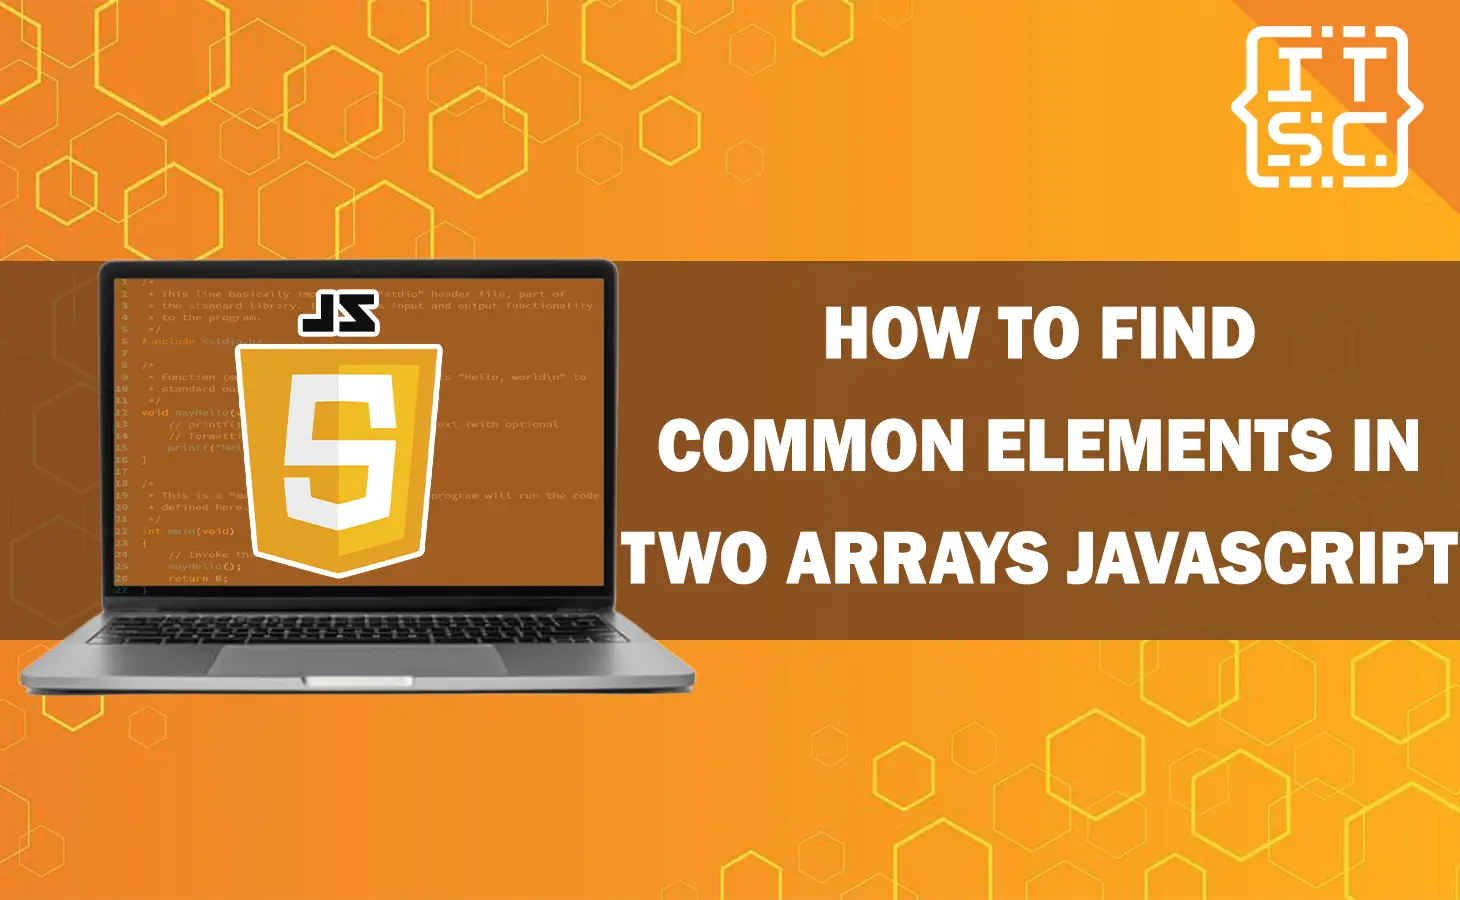 How to find common elements in two arrays JavaScript